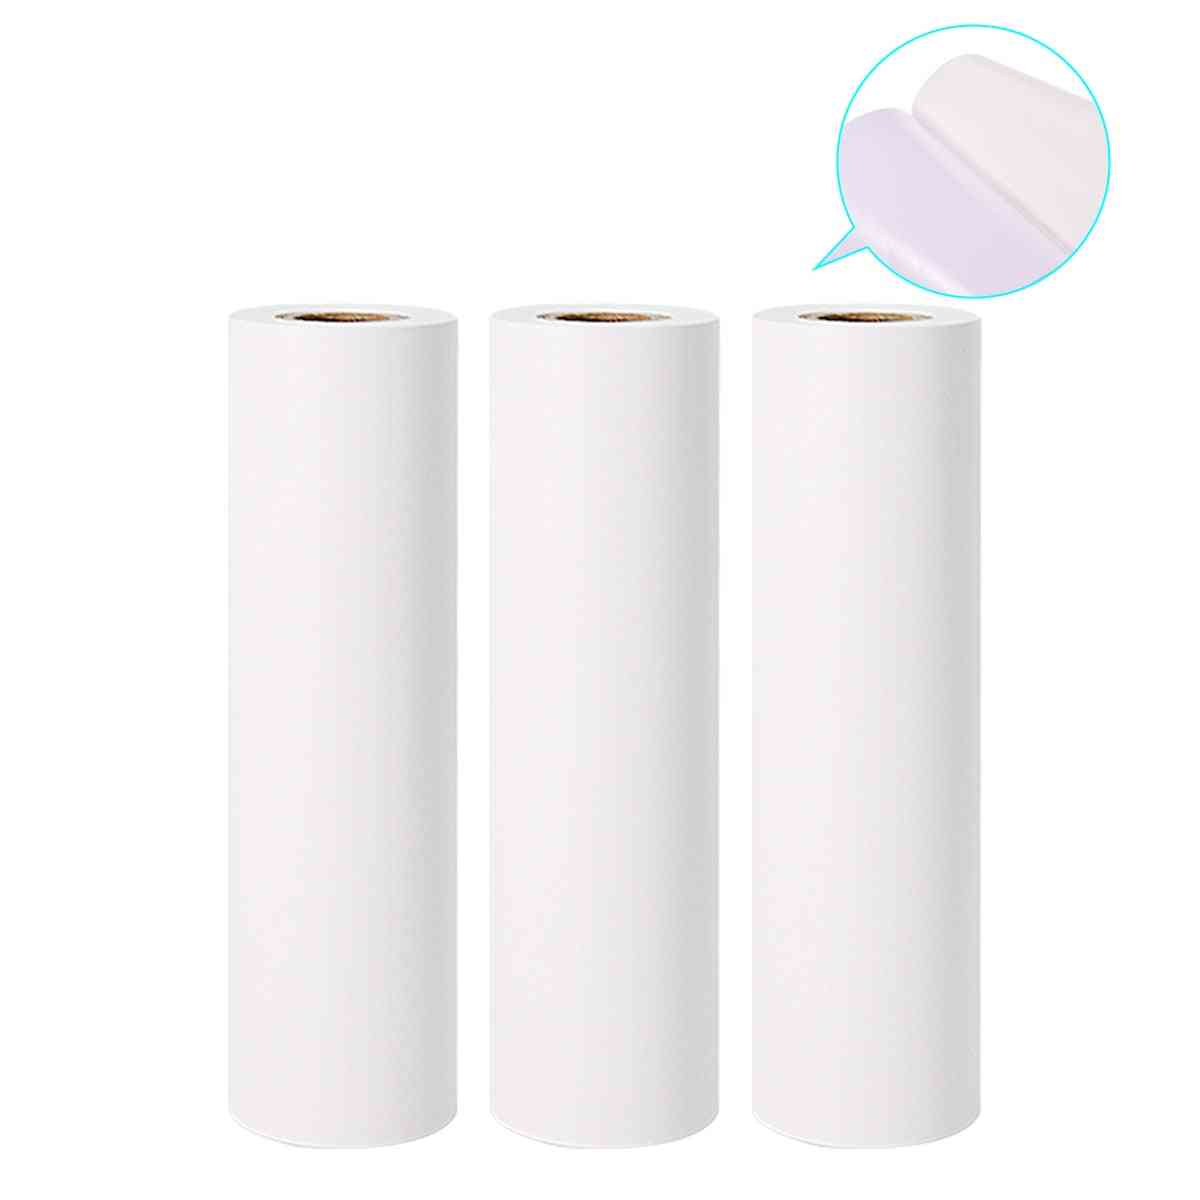 White Self-adhesive Thermal Paper Roll